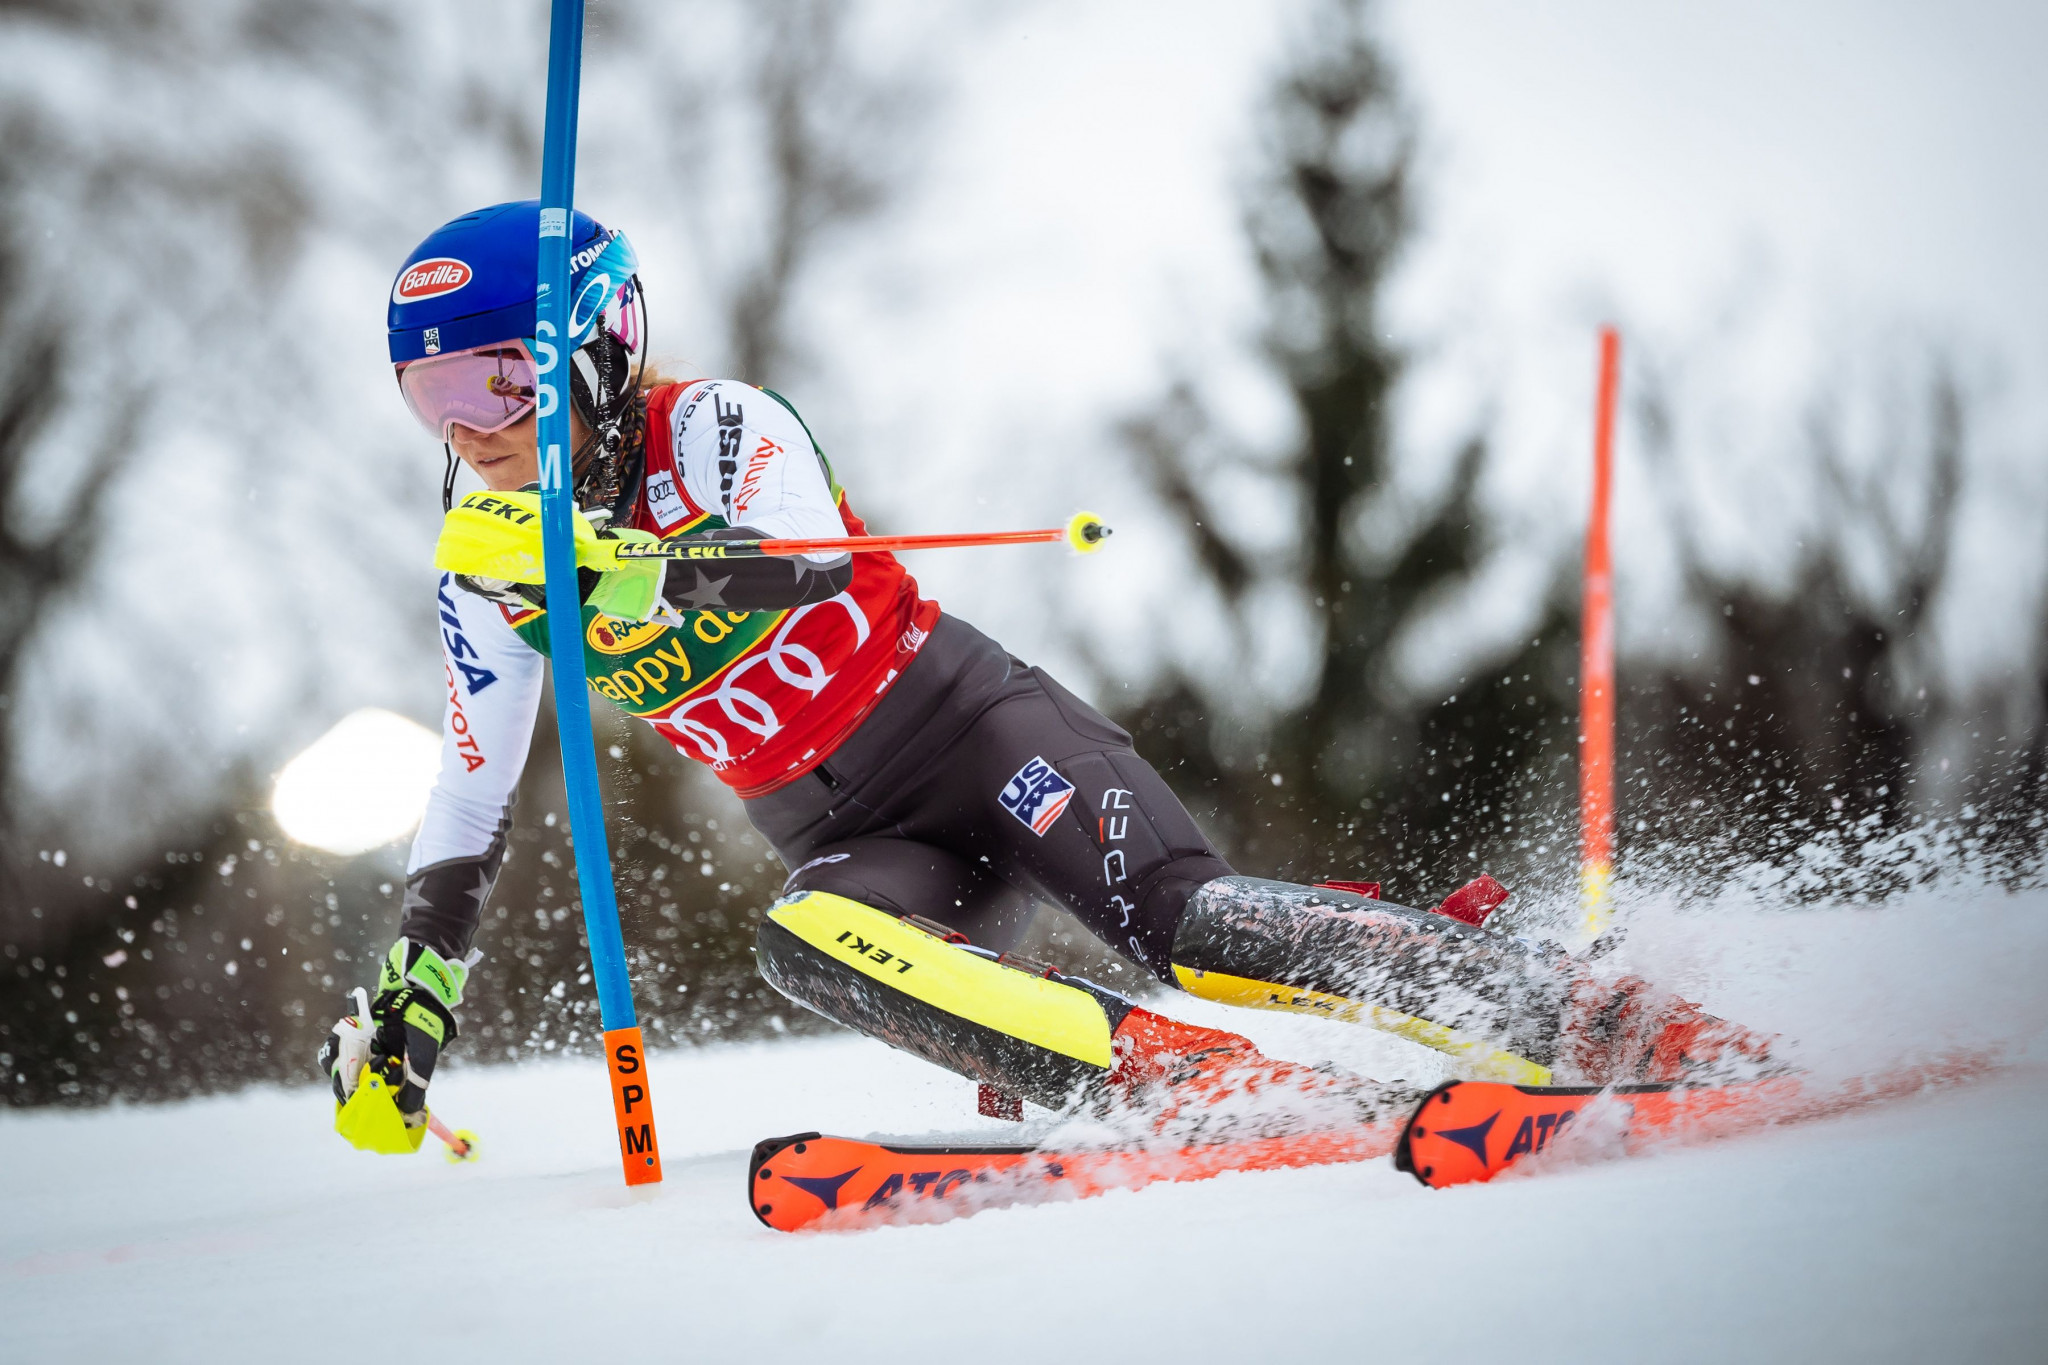 Shiffrin sets personal record with 13th victory at FIS Alpine Skiing World Cup